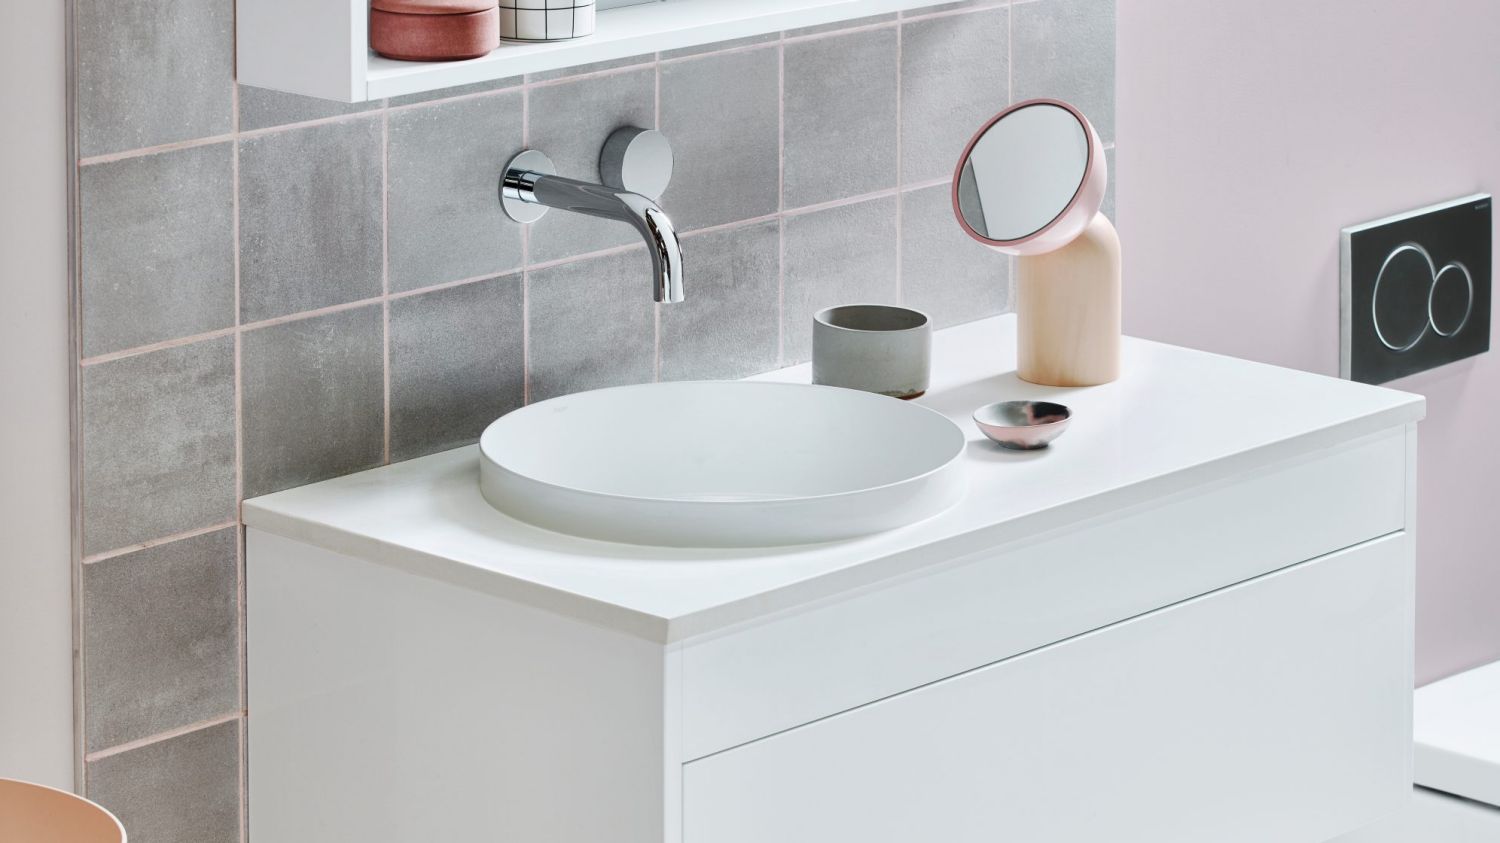 Simple white bathroom vanity in combination with grey tiles creates calm and modern athmosphere // reece.com.au